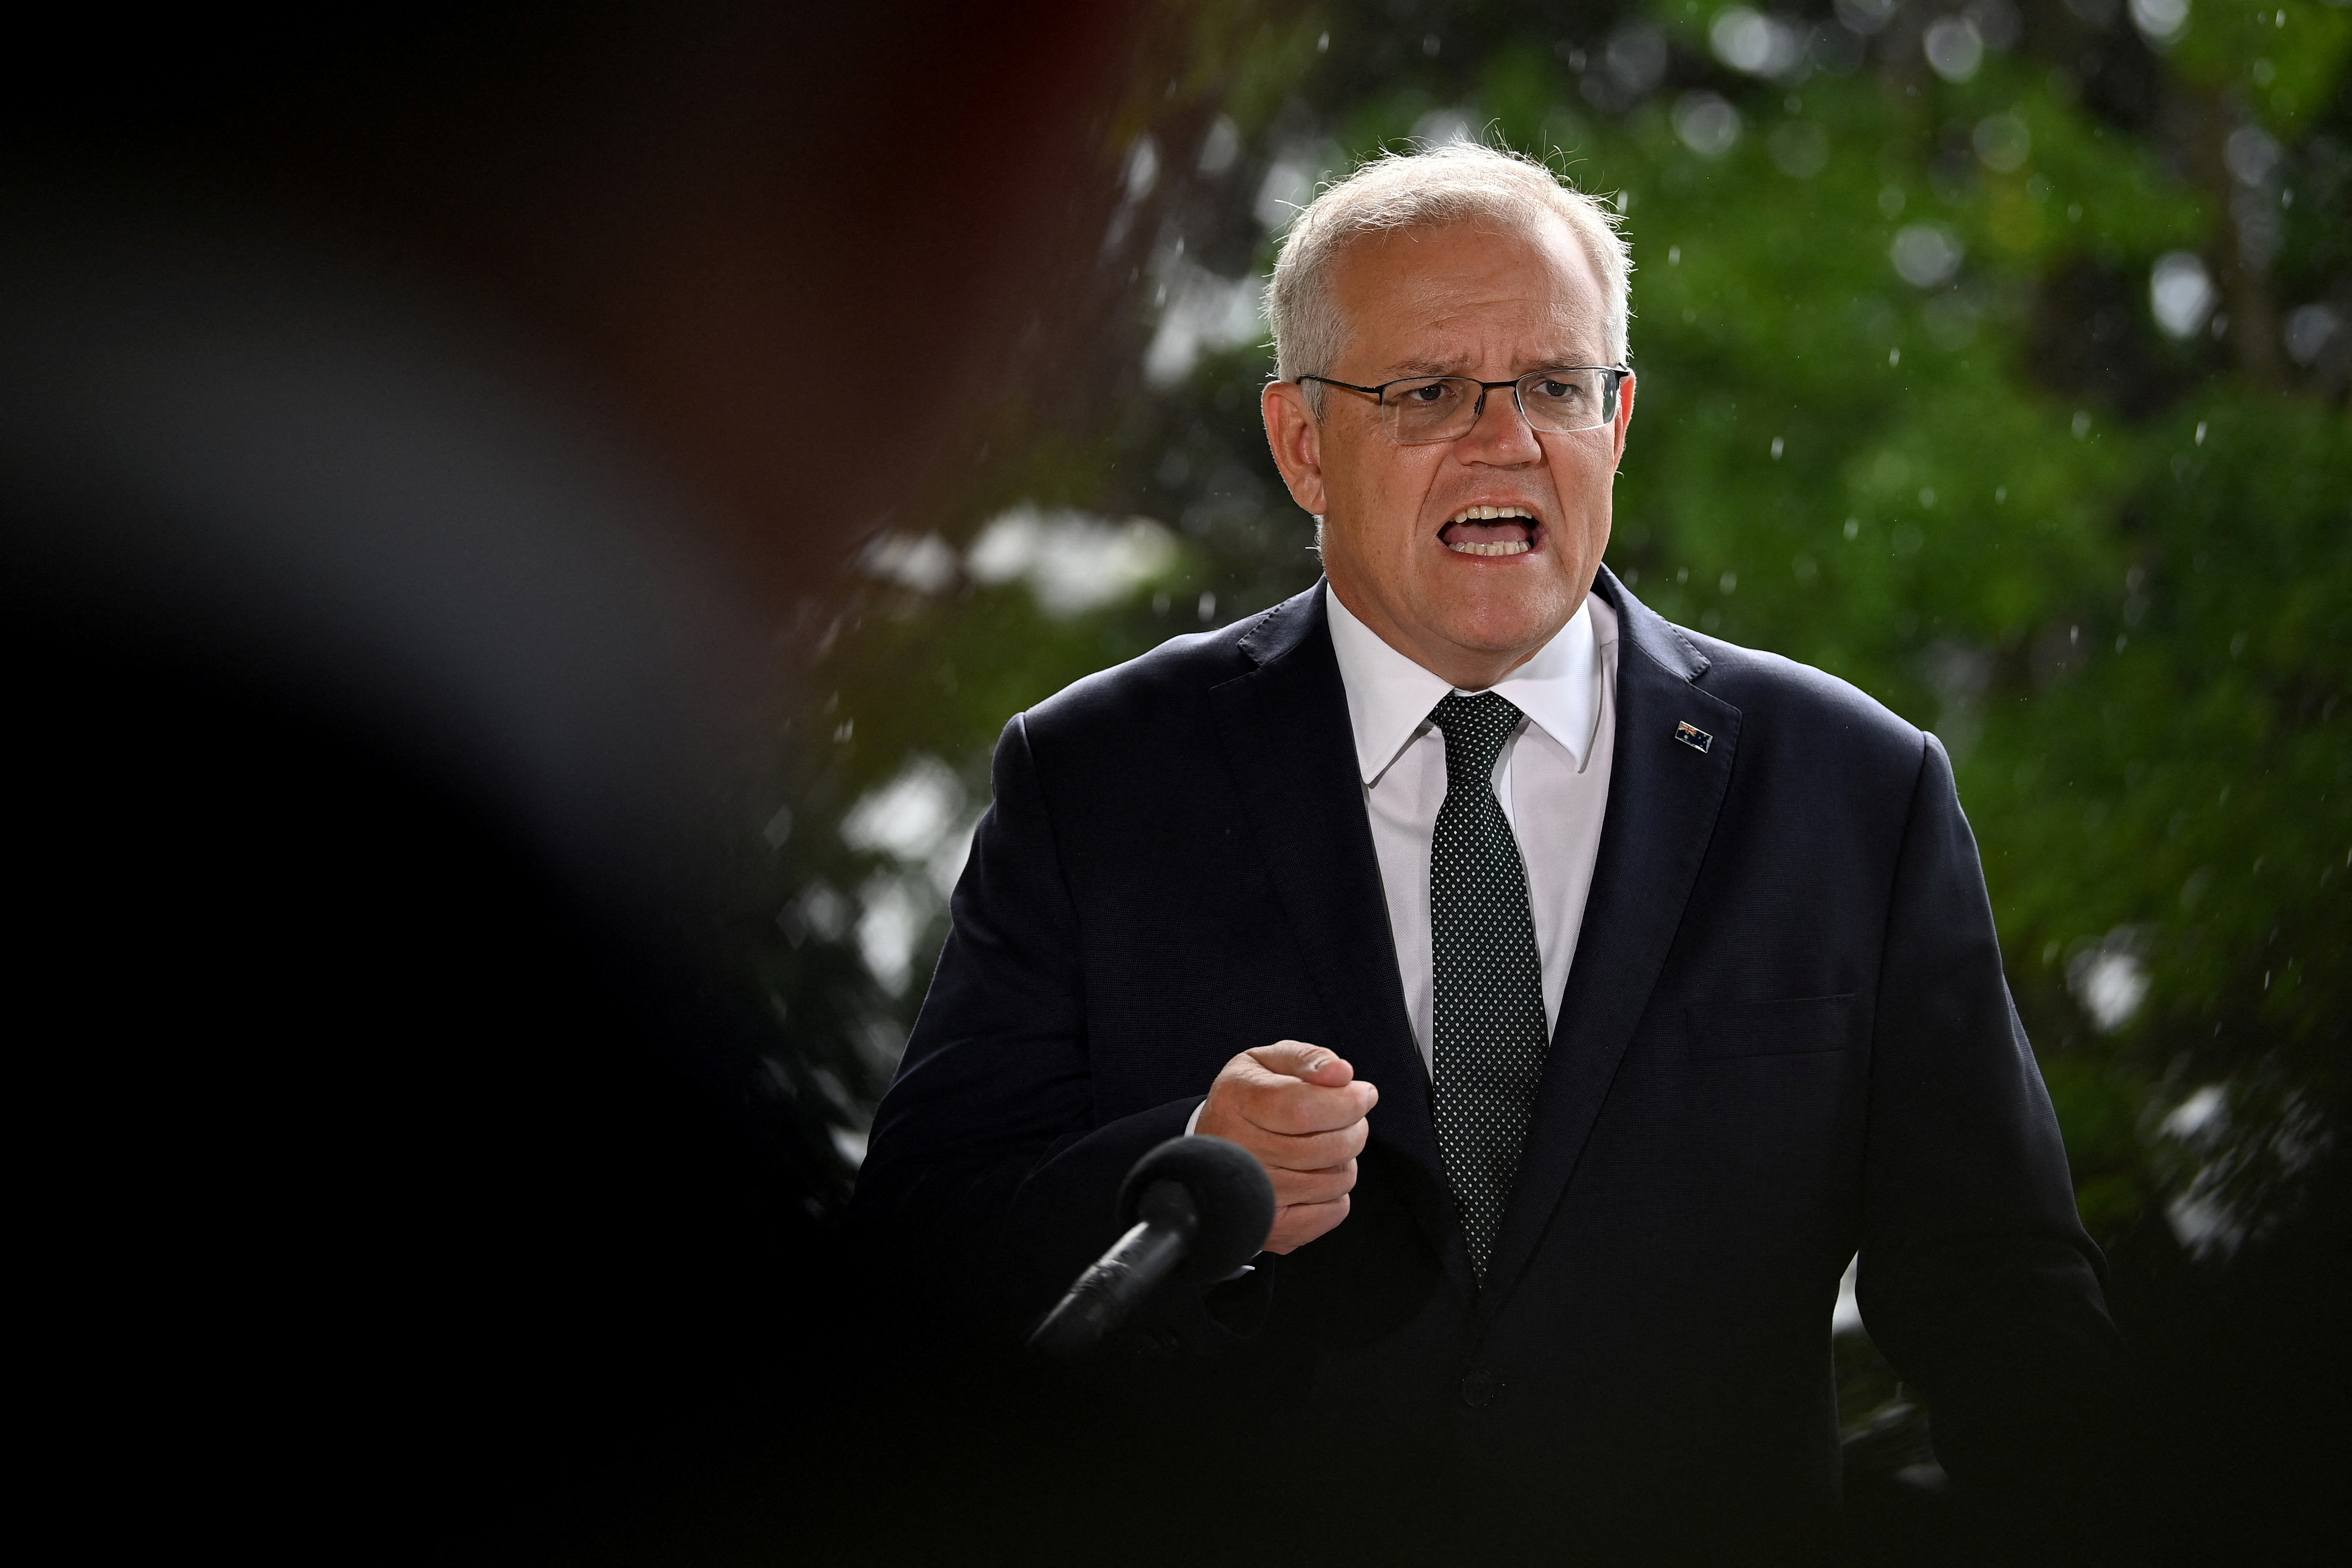 Australia's Prime Minister Scott Morrison speaks to the media during a press conference at Kirribilli House in Sydney, Australia, February 24, 2022. AAP Image/Bianca De Marchi via REUTERS ATTENTION EDITORS - THIS IMAGE WAS PROVIDED BY A THIRD PARTY. NO RESALES. NO ARCHIVE. NEW ZEALAND OUT. NO COMMERCIAL OR EDITORIAL SALES IN NEW ZEALAND. AUSTRALIA OUT. NO COMMERCIAL OR EDITORIAL SALES IN AUSTRALIA